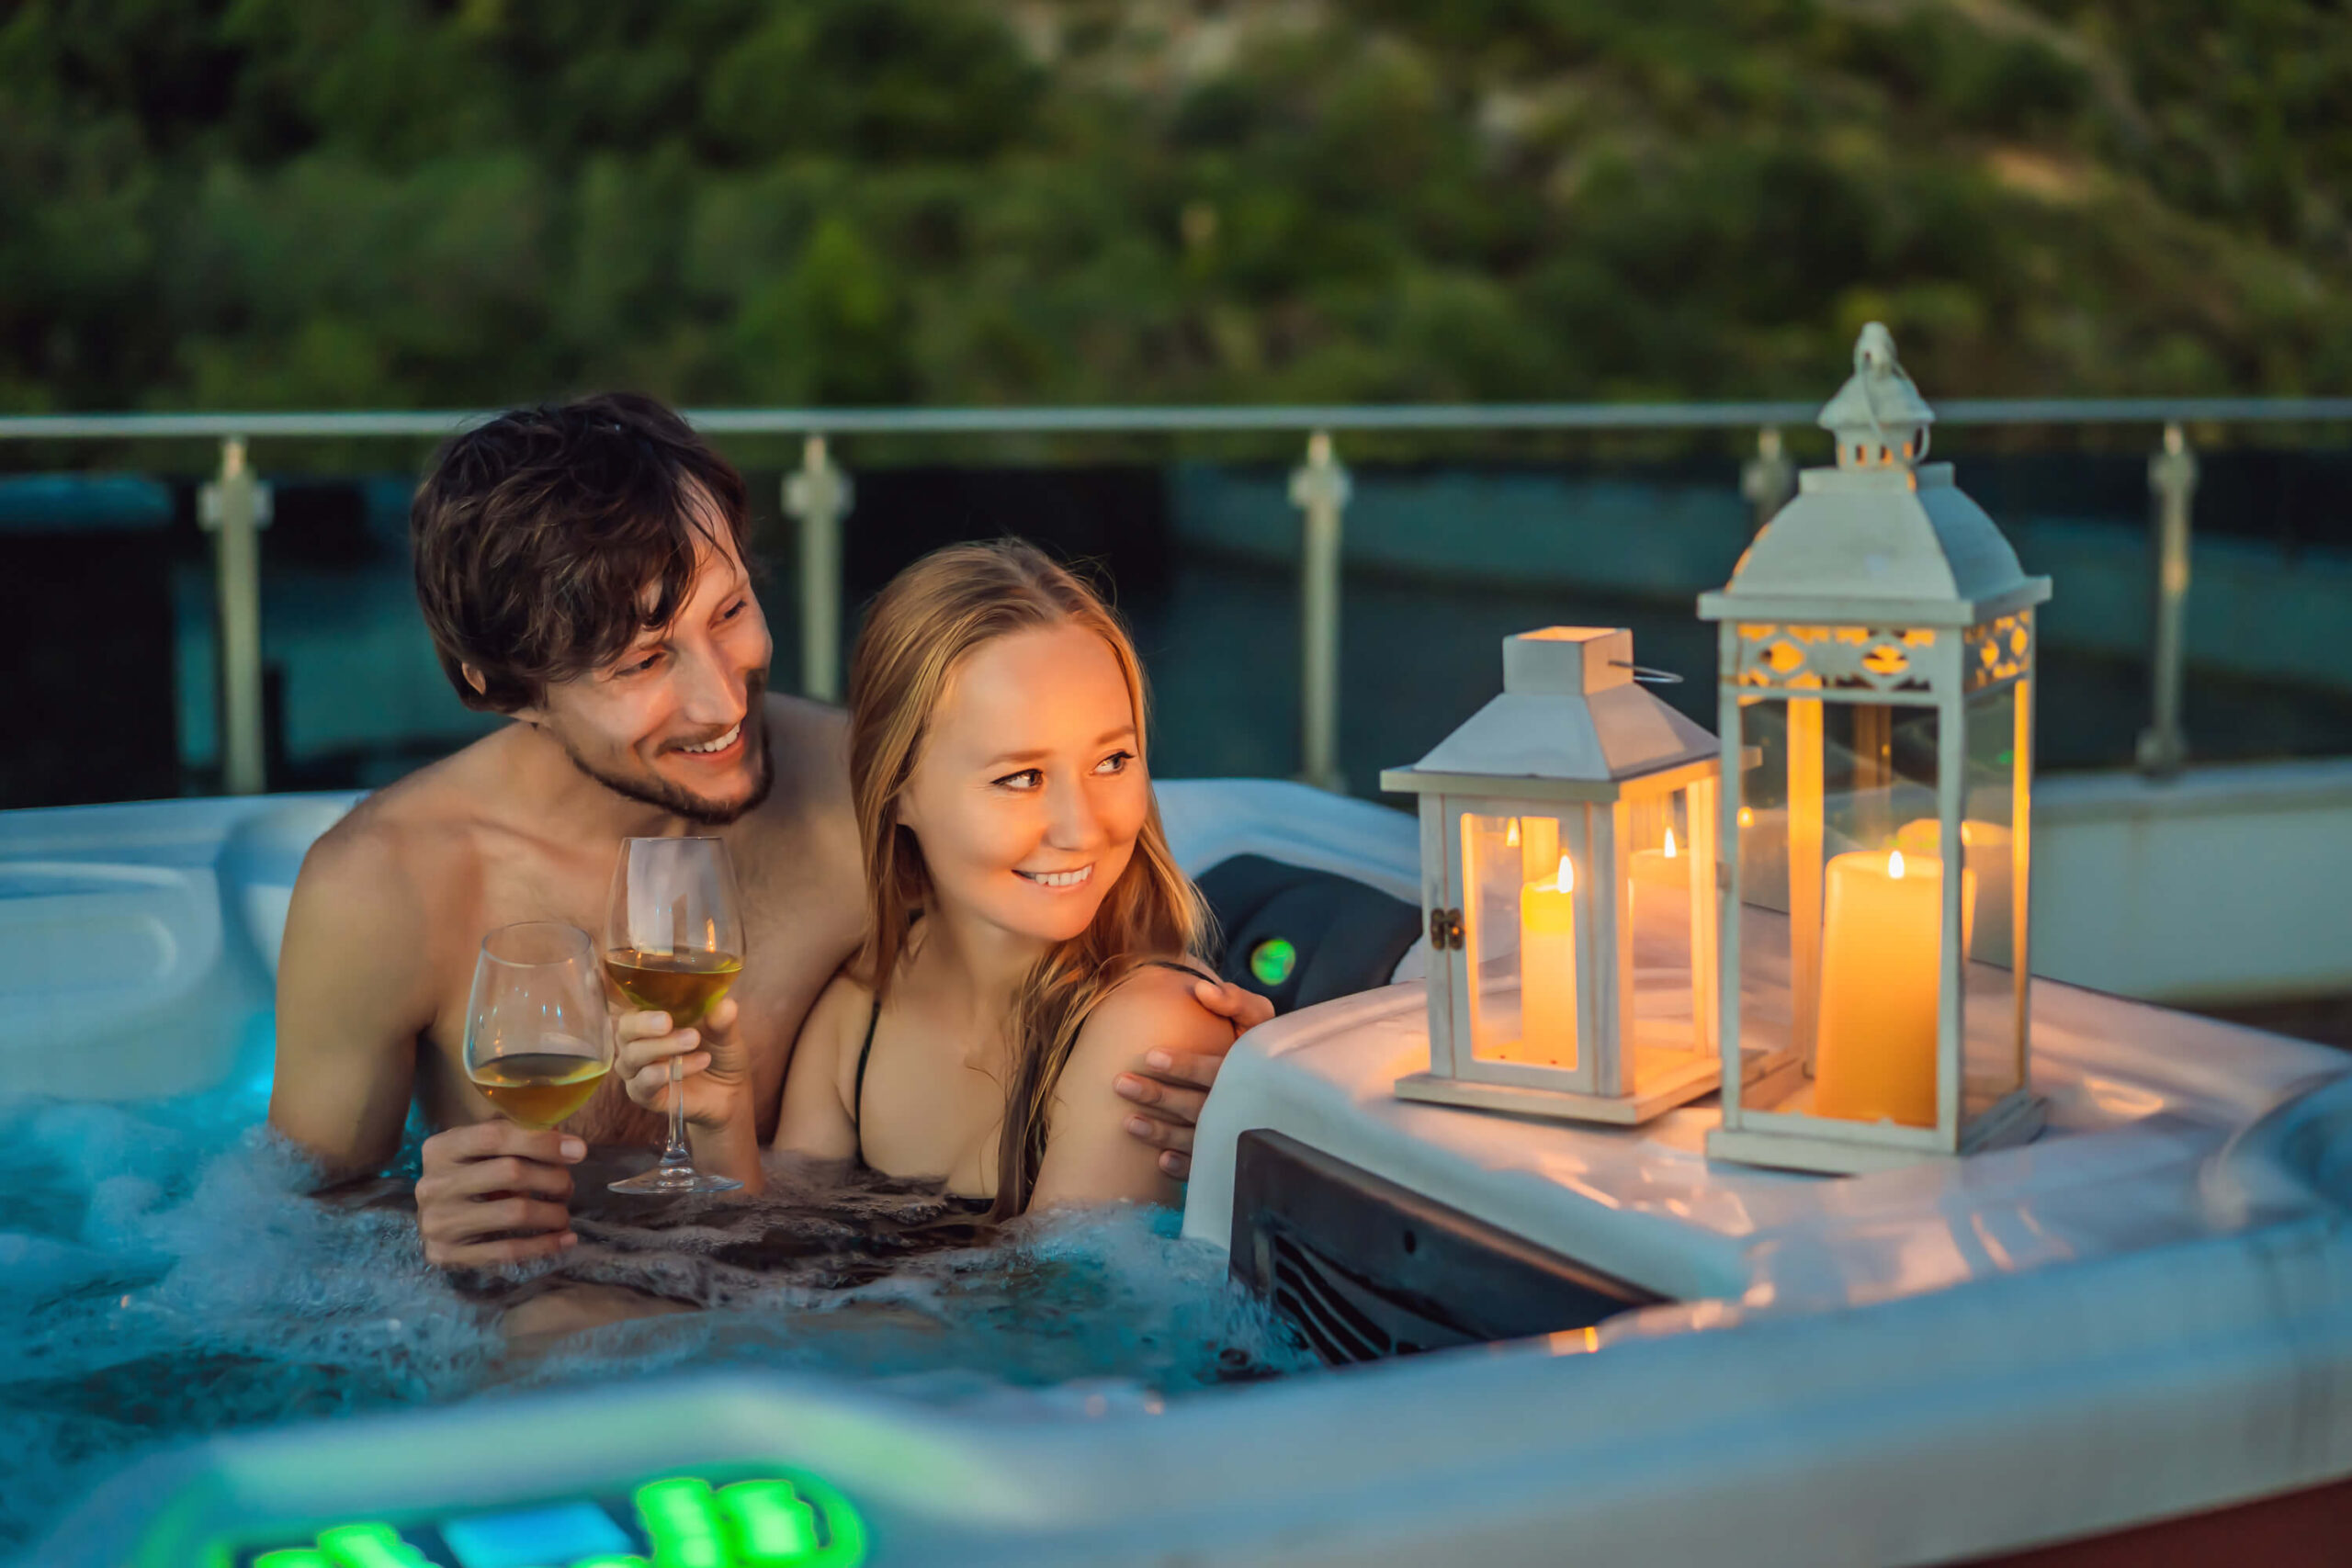 Love is in the Air: Turn Your Evening Soak into a Romantic One